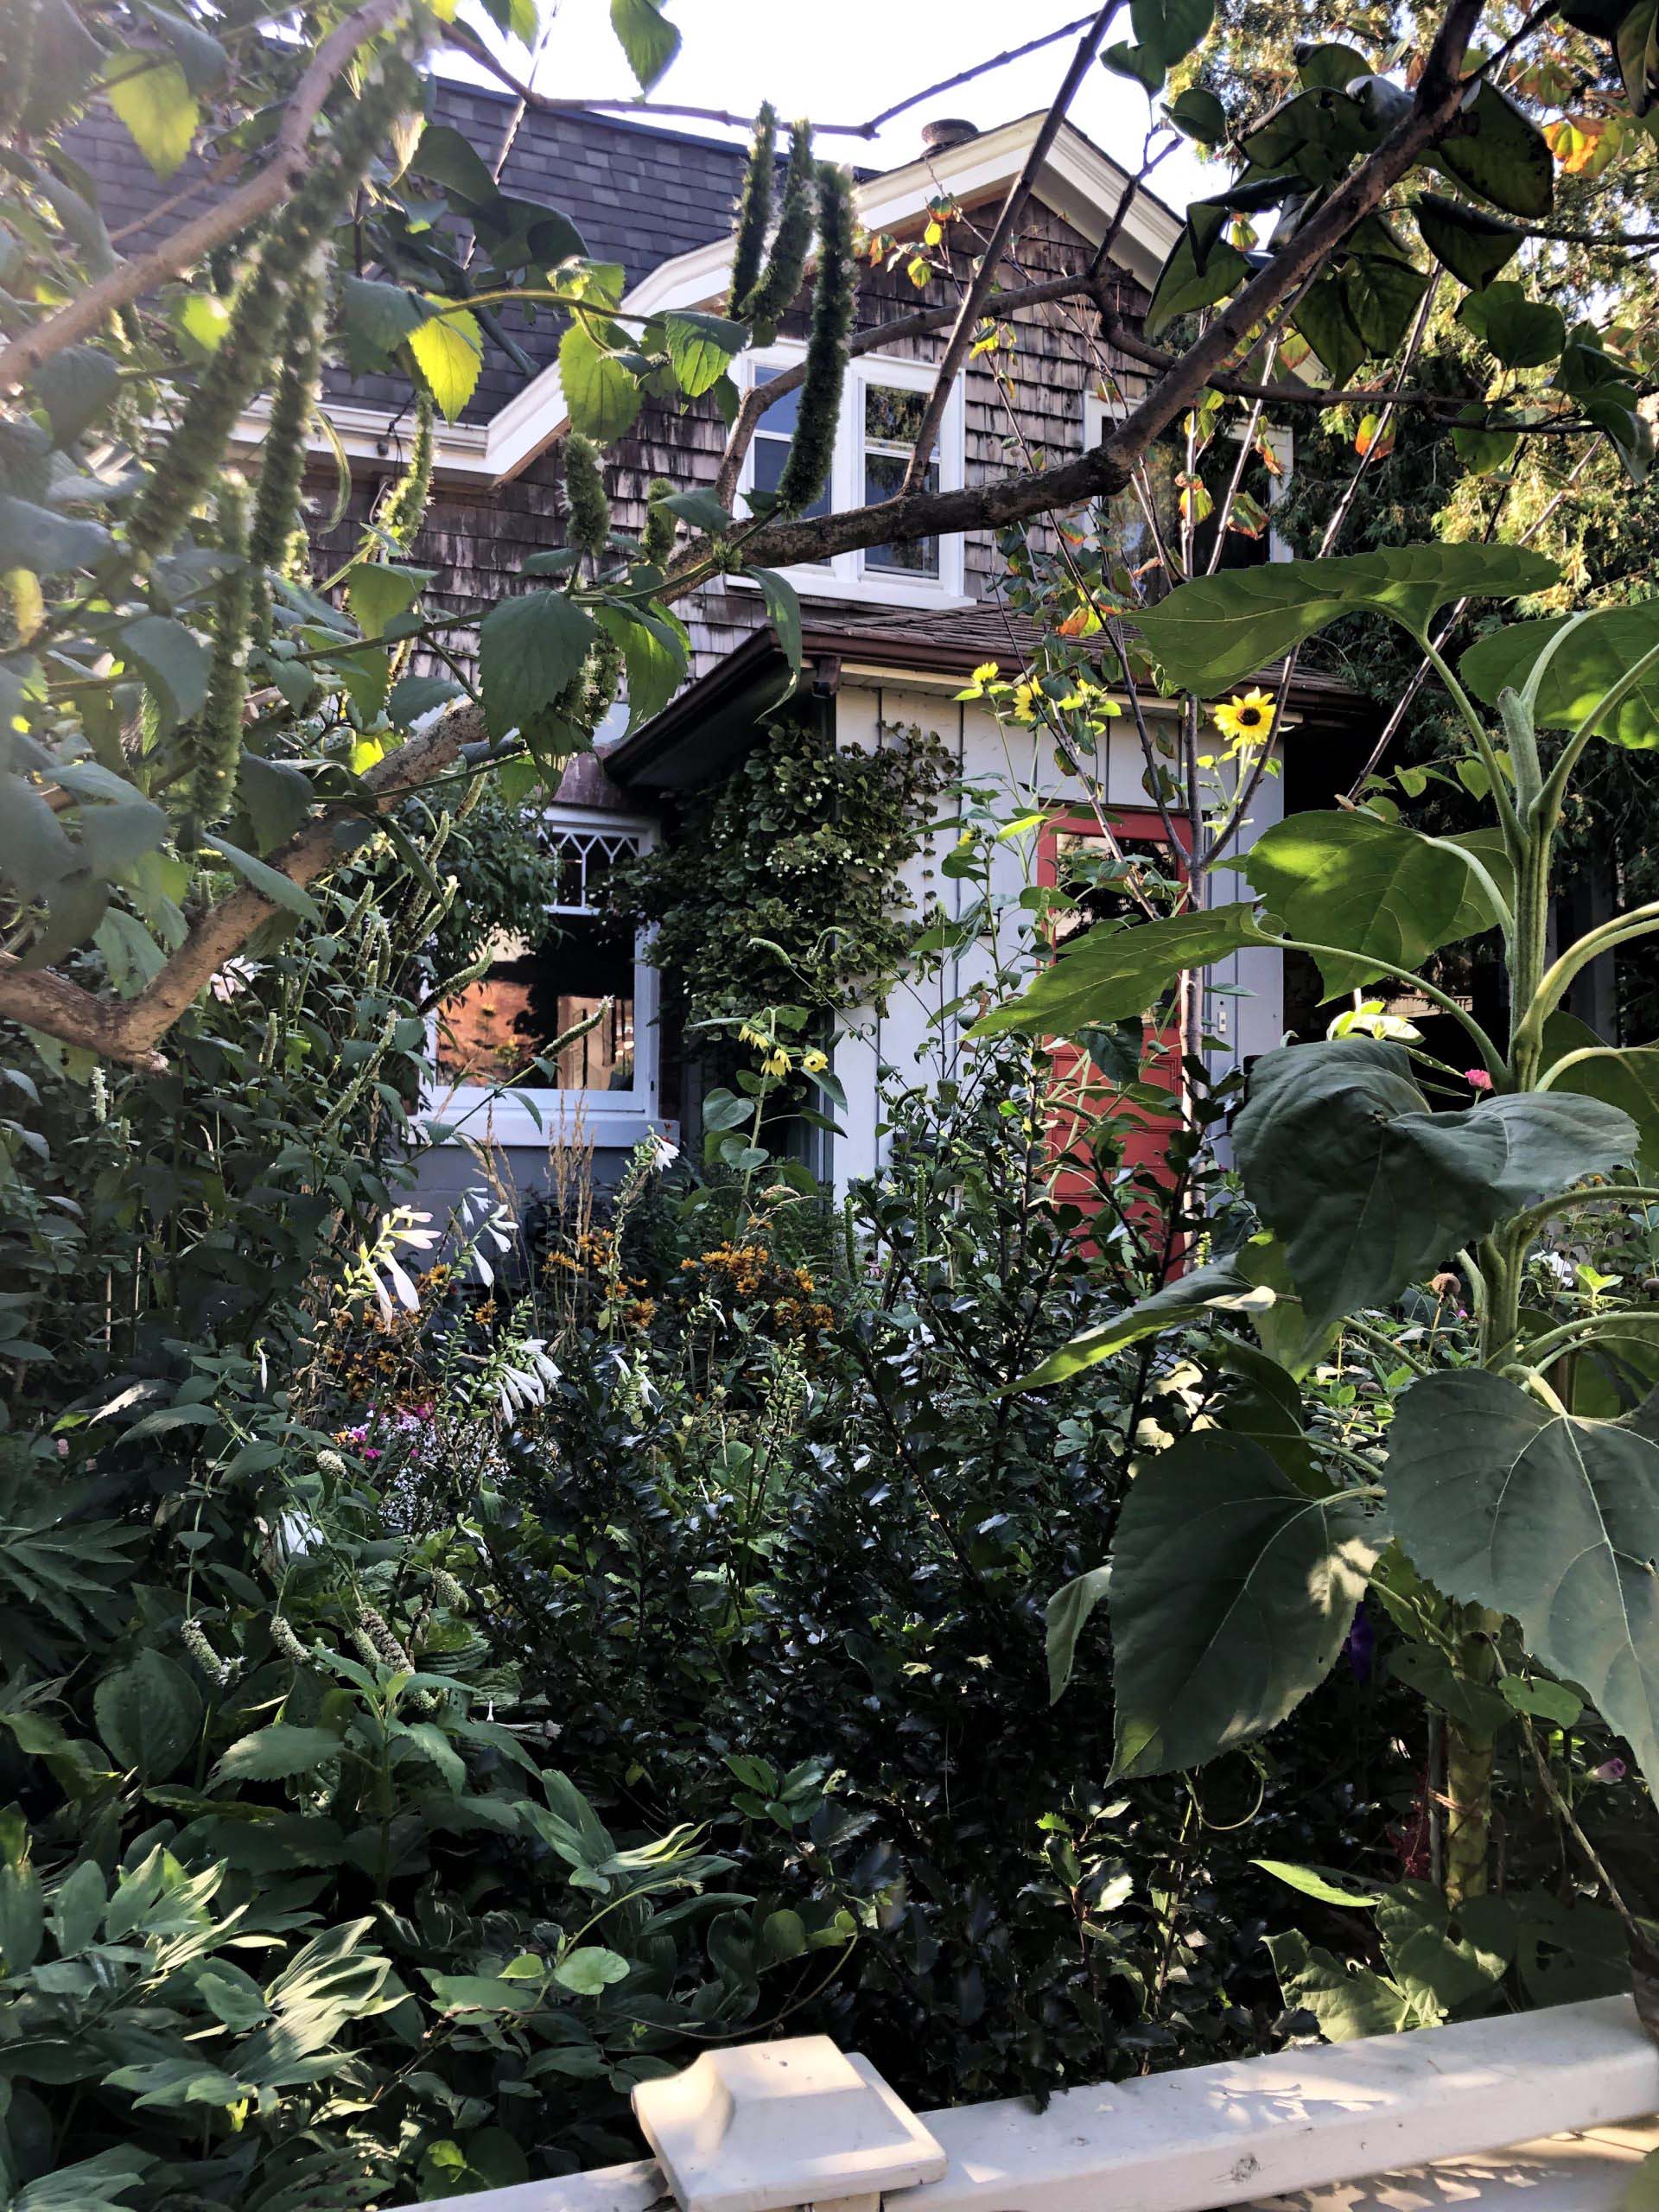 A house with a garden in the front yard containing shrubs, plants and flowers